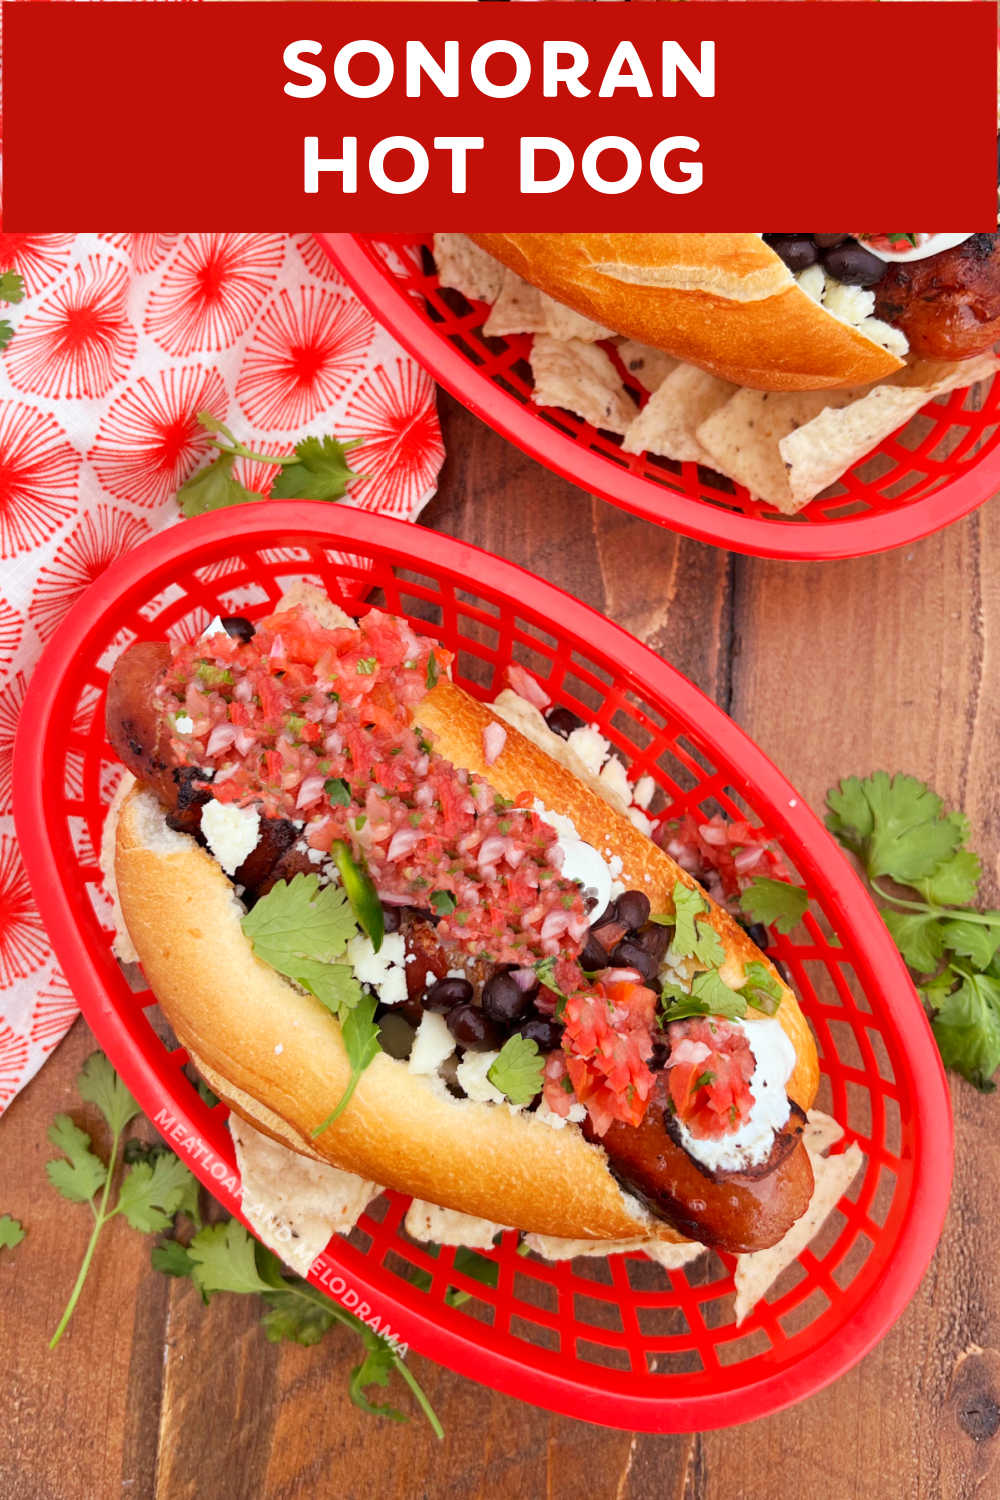 This delicious Sonoran Hot Dog Recipe is basically Mexican hot dogs wrapped in bacon and topped with black beans, salsa fresca, Cotija cheese and crema on a bolillo roll. Enjoy a taste of the Southwest and make Sonoran hot dogs for your next cook out! via @meamel